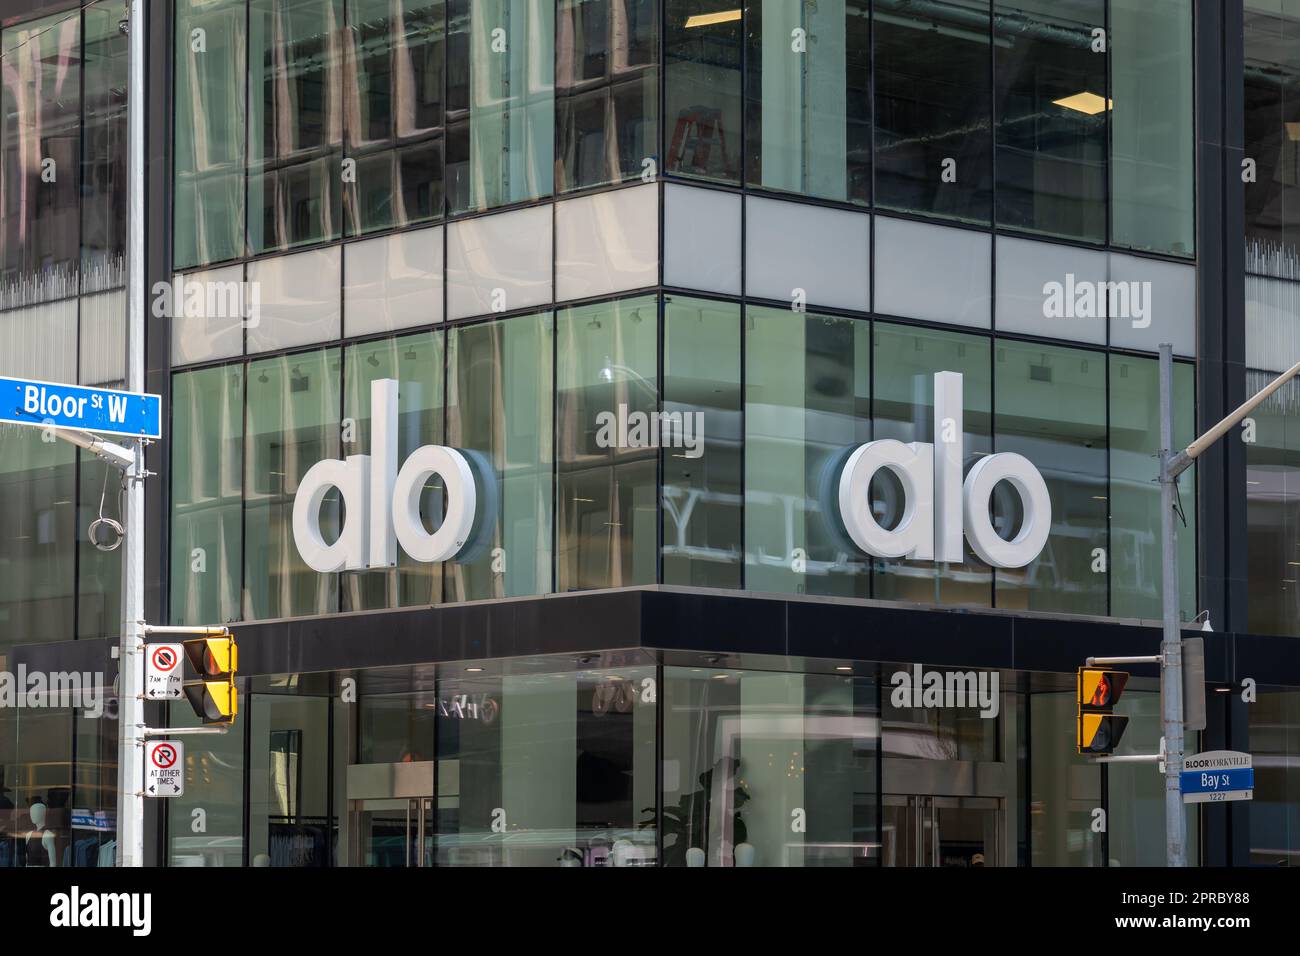 Toronto, ON, Canada - April 26, 2023: An Alo (Alo Yoga) store at the corner of Bay and Bloor in Toronto, Canada. Stock Photo